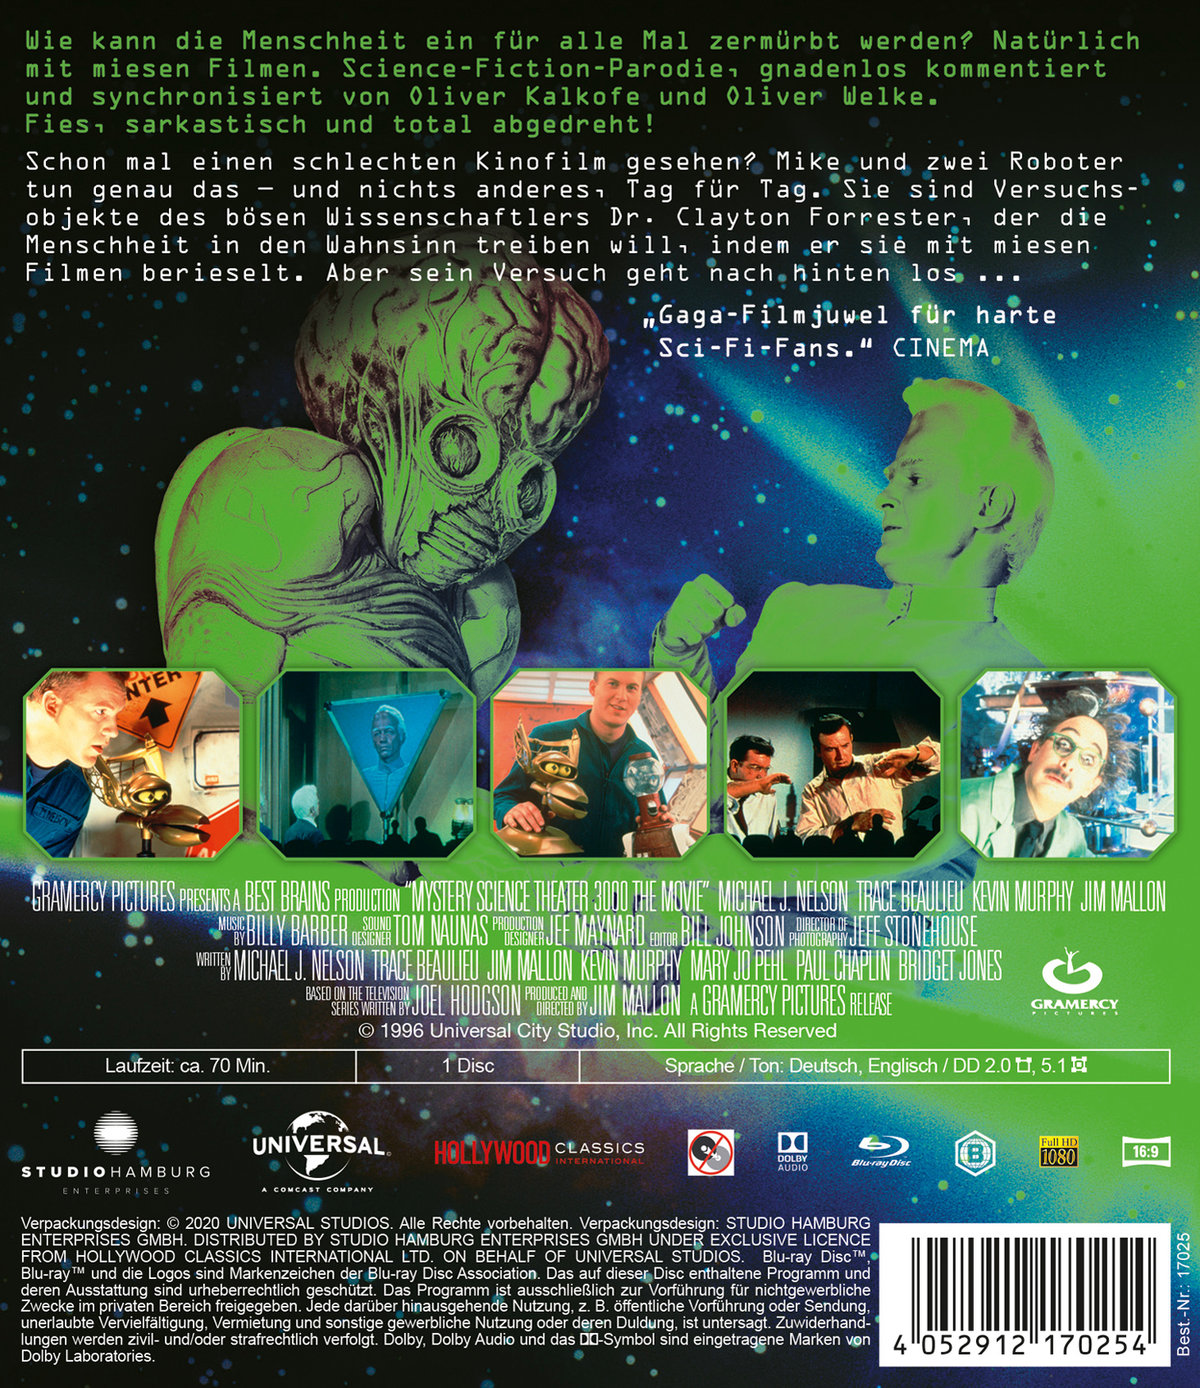 Mystery Science Theatre 3000: The Movie (blu-ray)